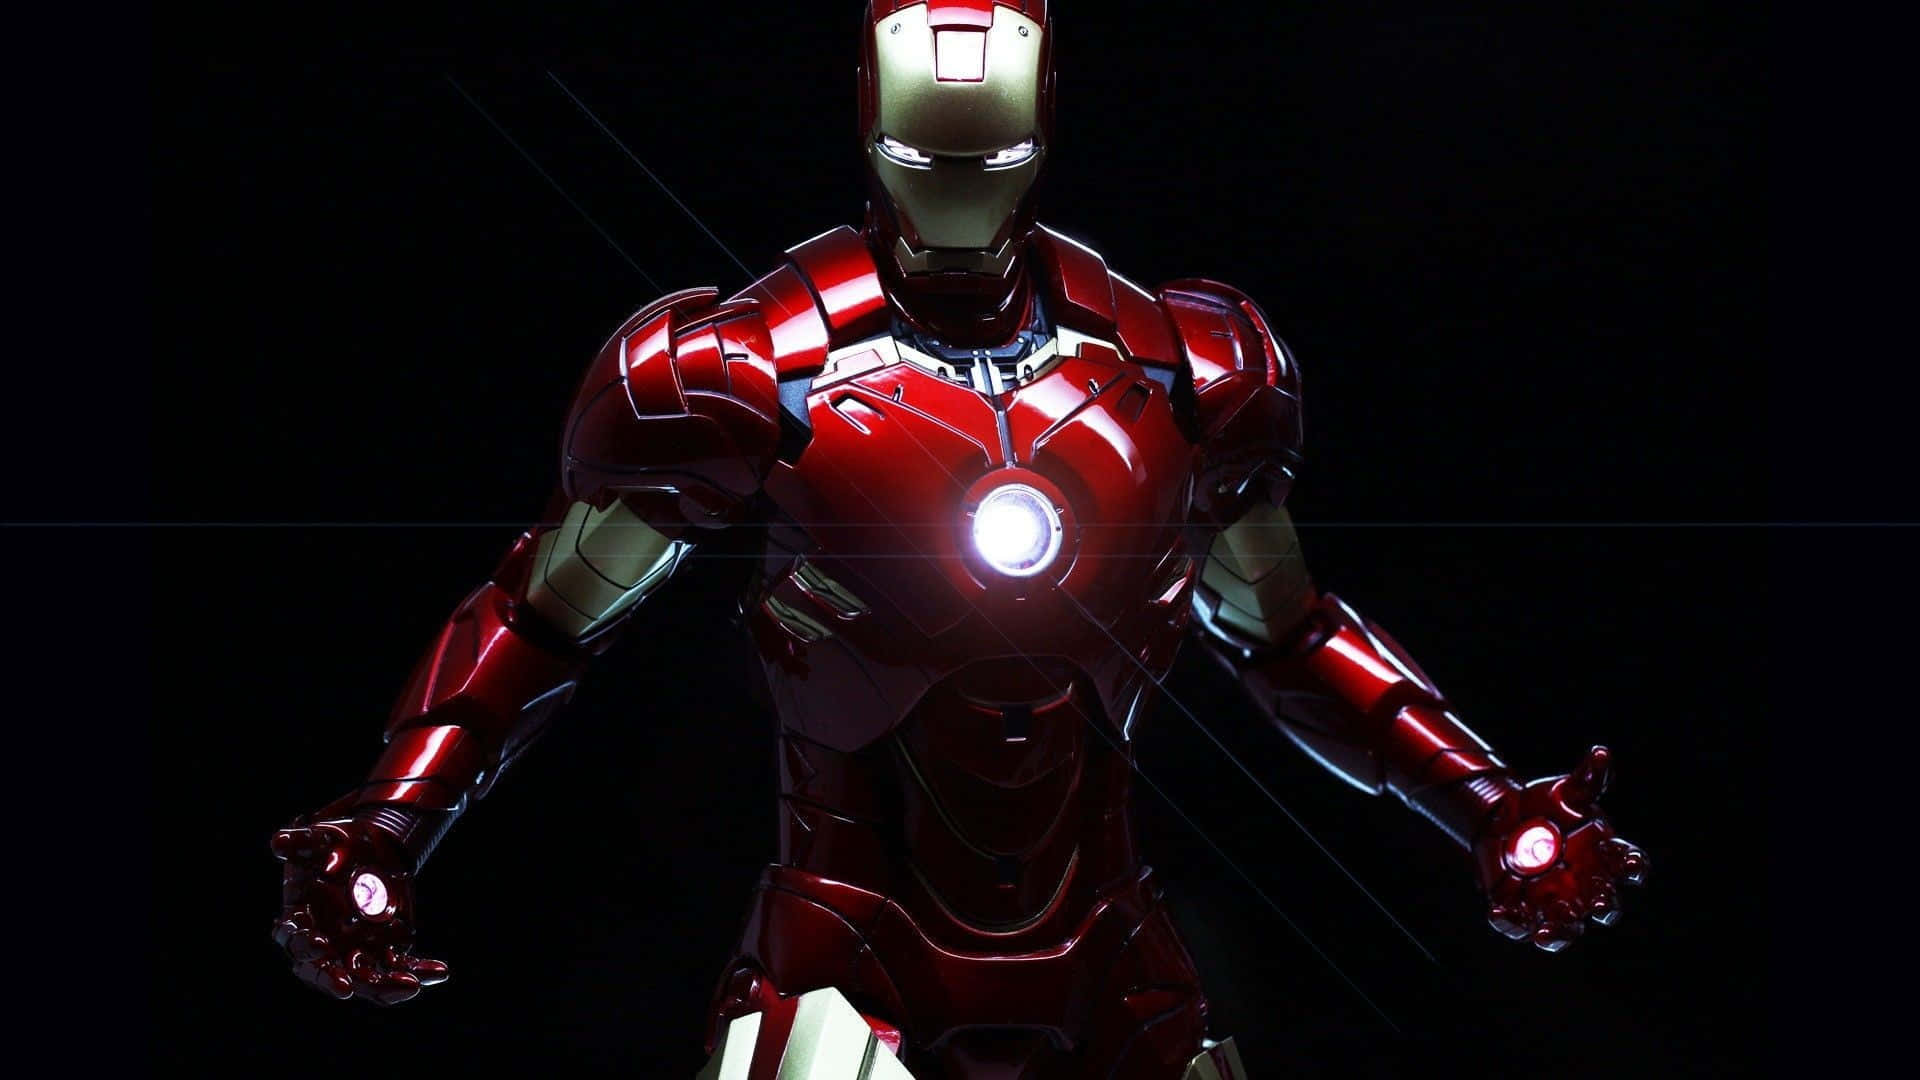 Get Ready To Assemble With Iron Man Action Figures! Wallpaper